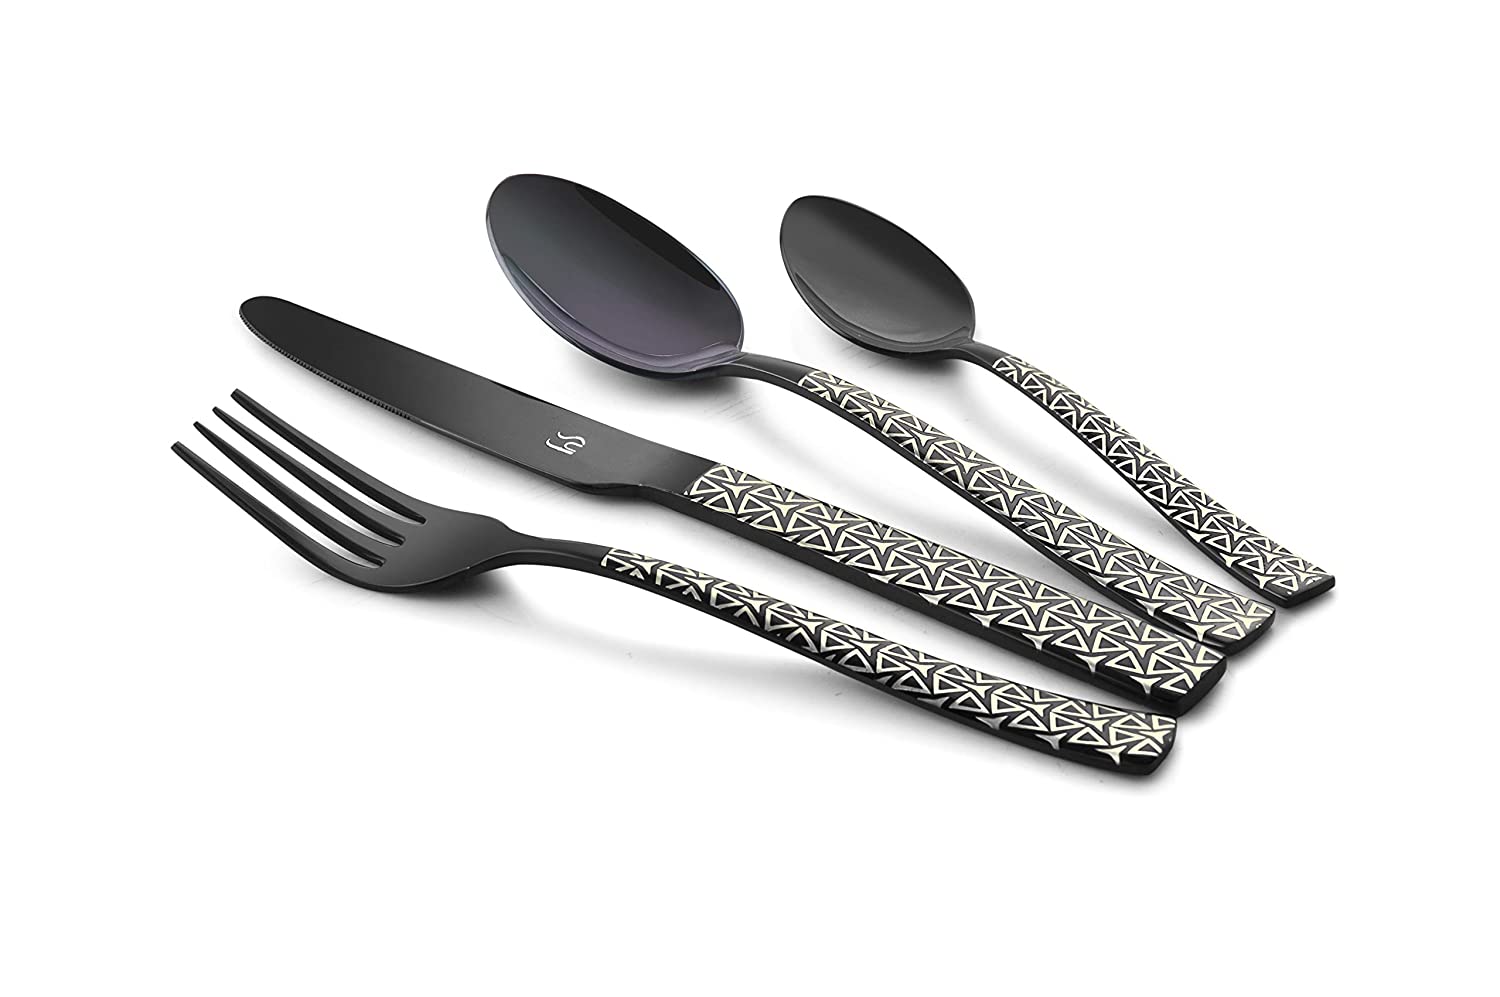 Detec™ FNS Phoenix 24 Pieces Stainless Steel Cutlery Set with Box Packaging